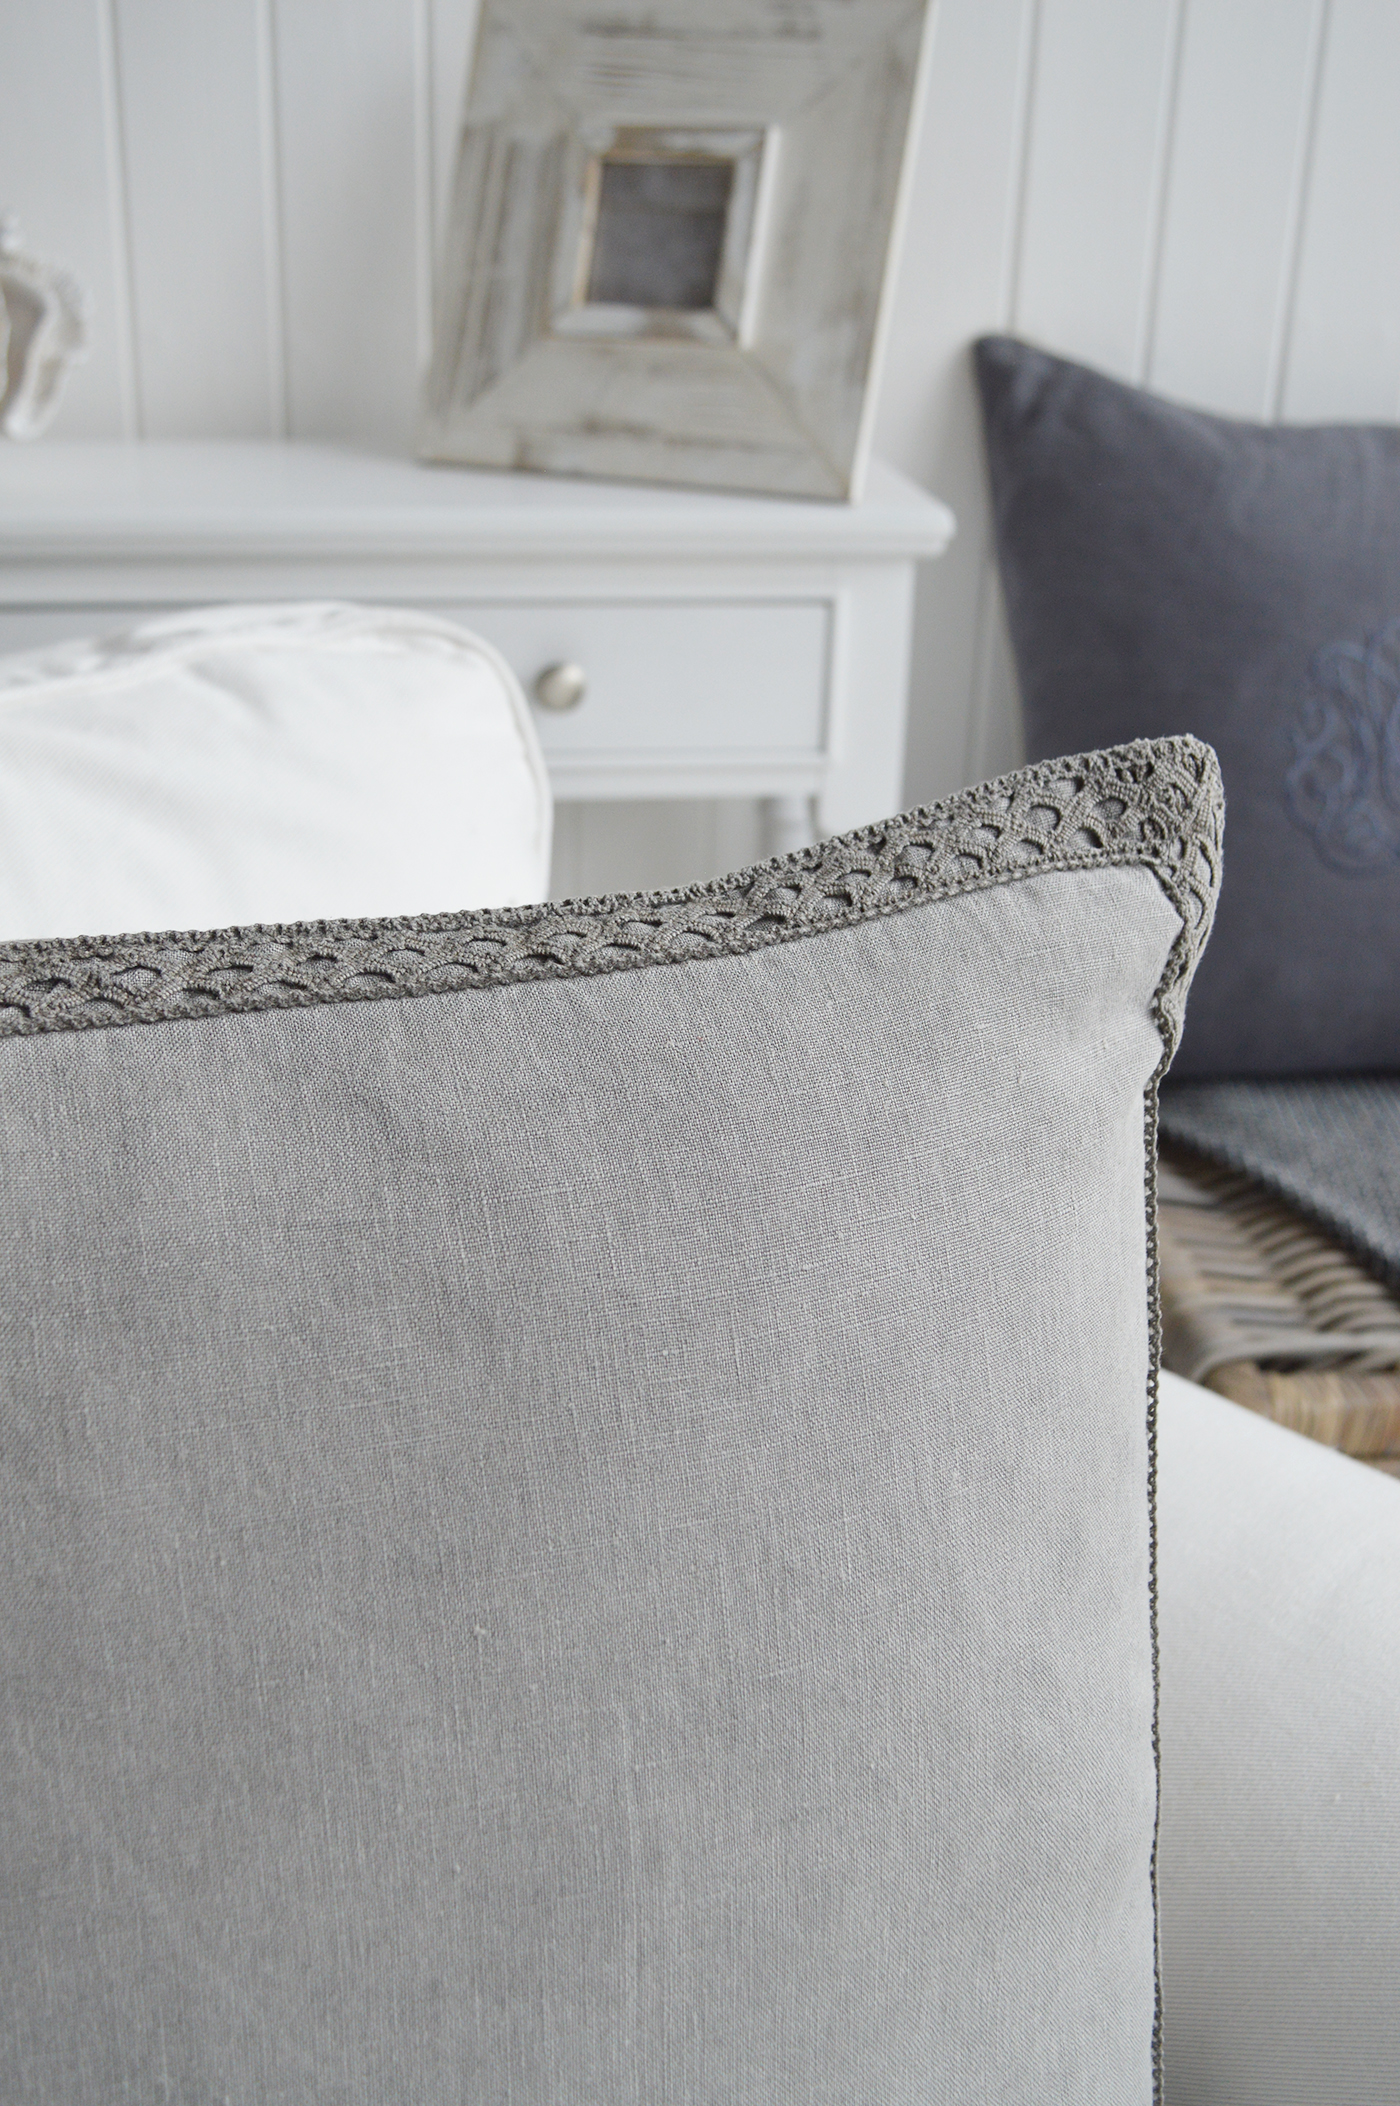 New England Style Country, Coastal and White Furniture and accessories for the home. Richmond grey 100% stonewashed Linen Feather Filled Cushion